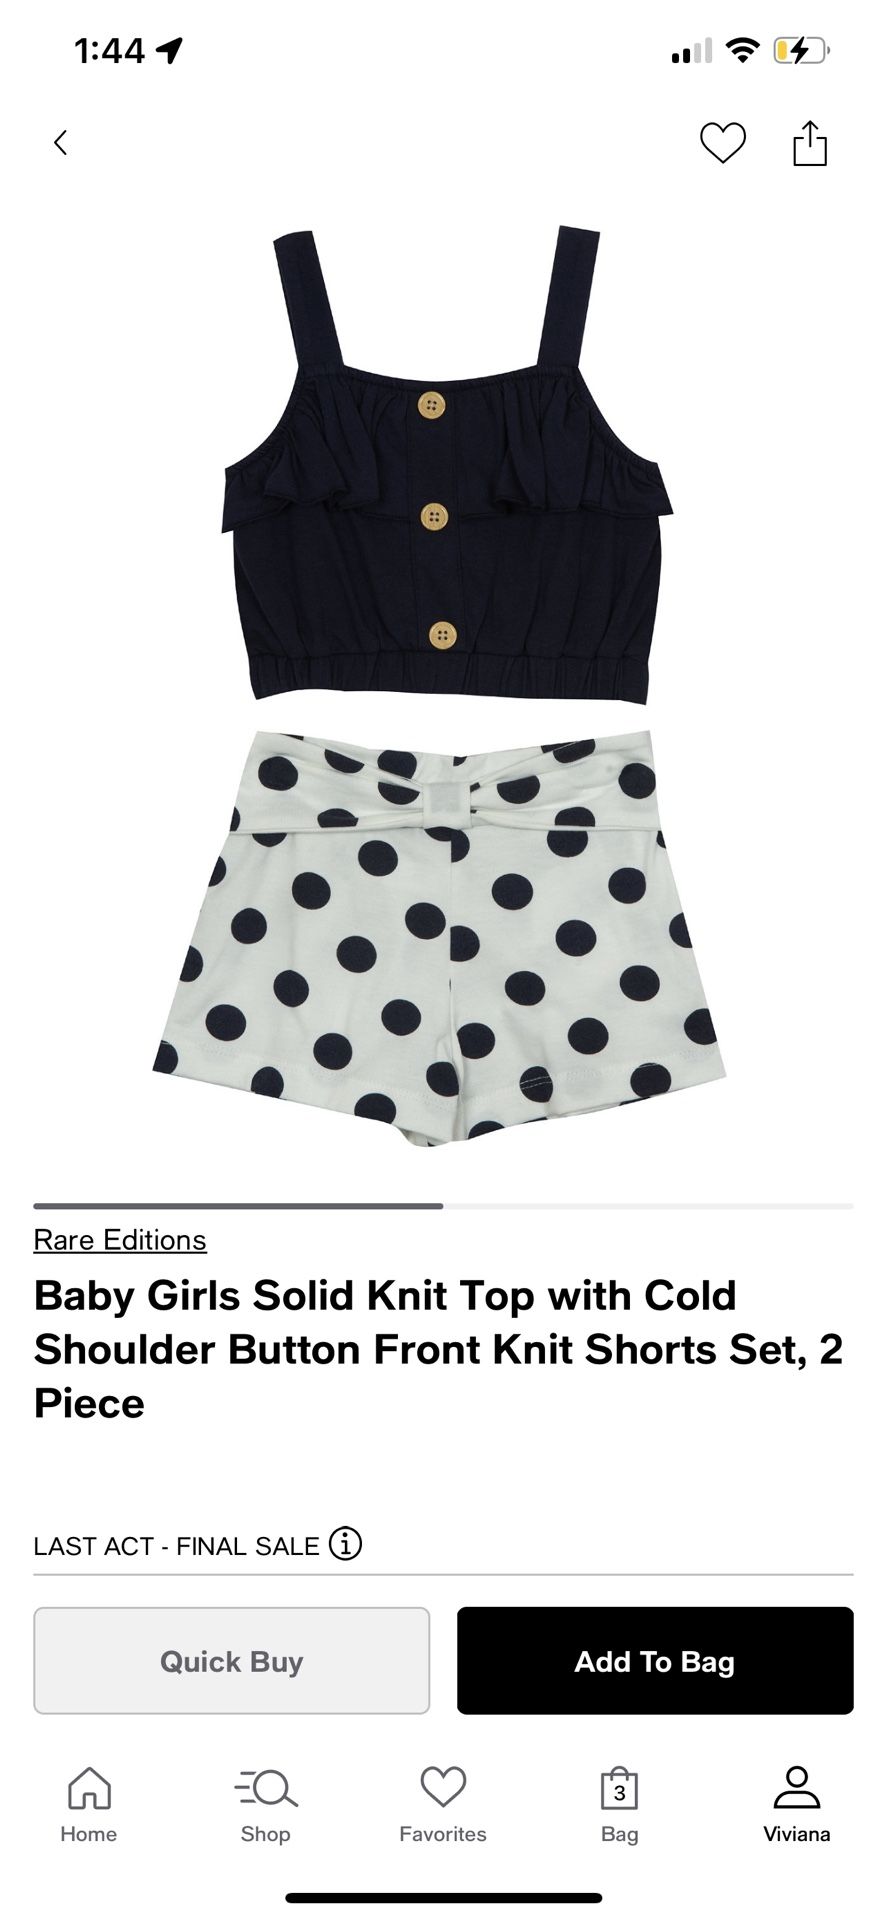 !!!BRAND NEW!!! CUTE POLKA DOT OUTFIT FOR GIRL 3-6 MONTHS